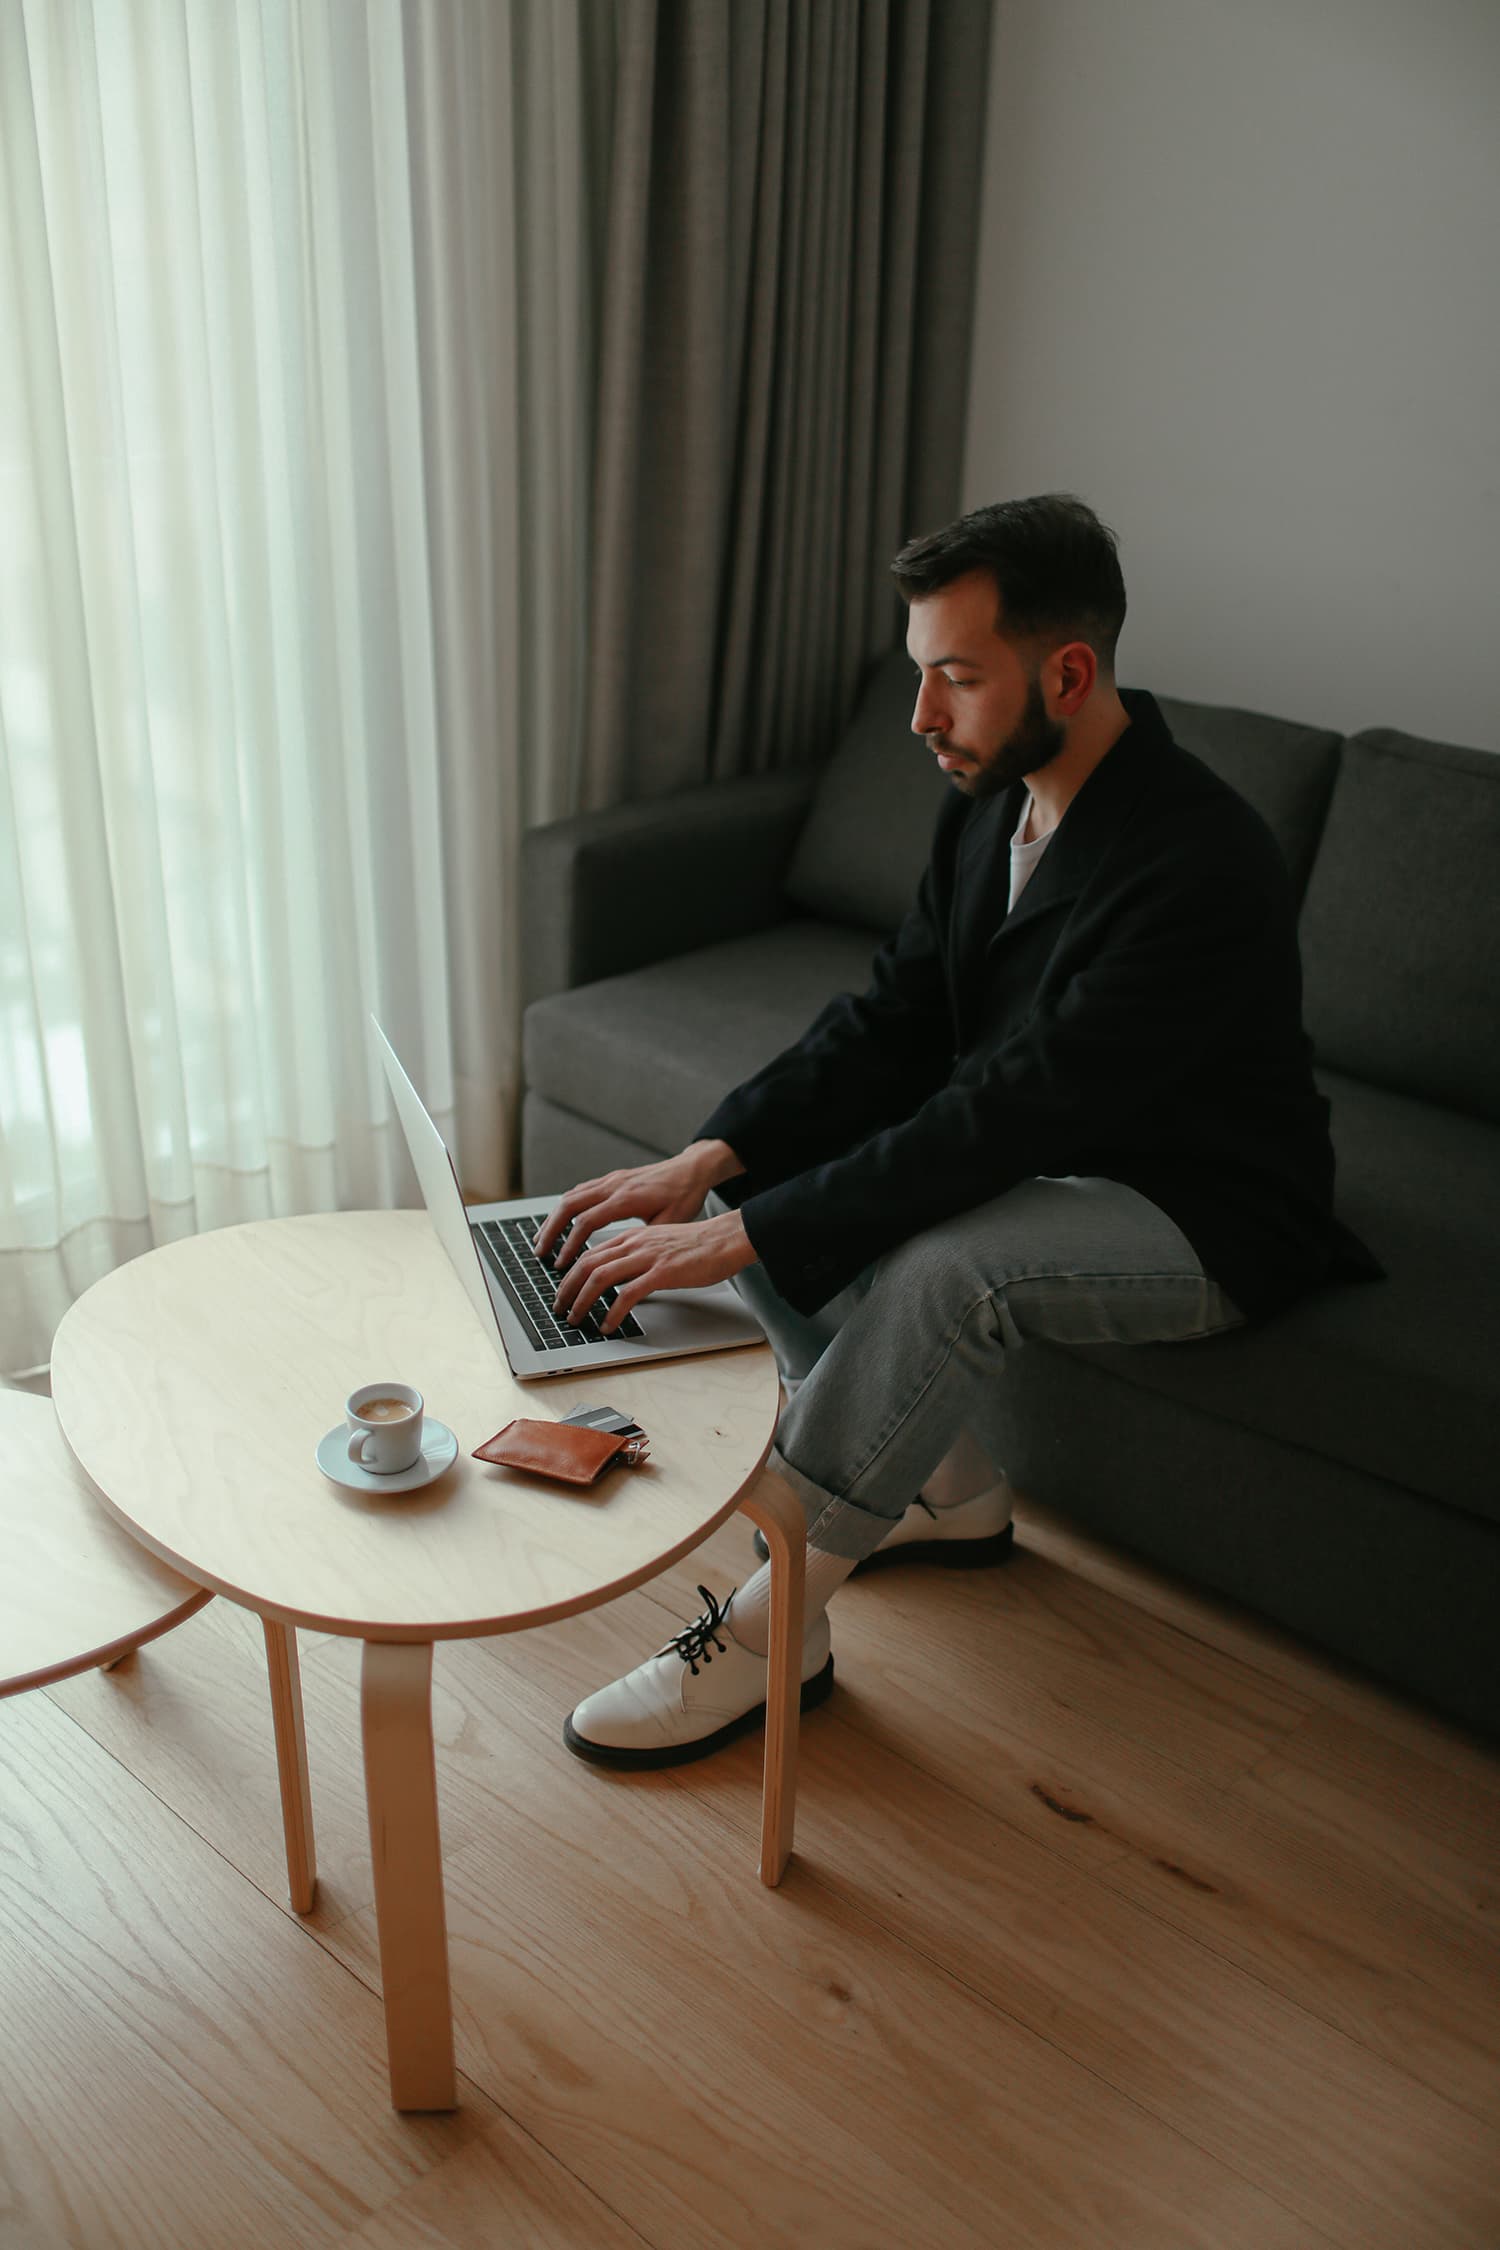 Man in Using a Laptop while Sitting on a Couch